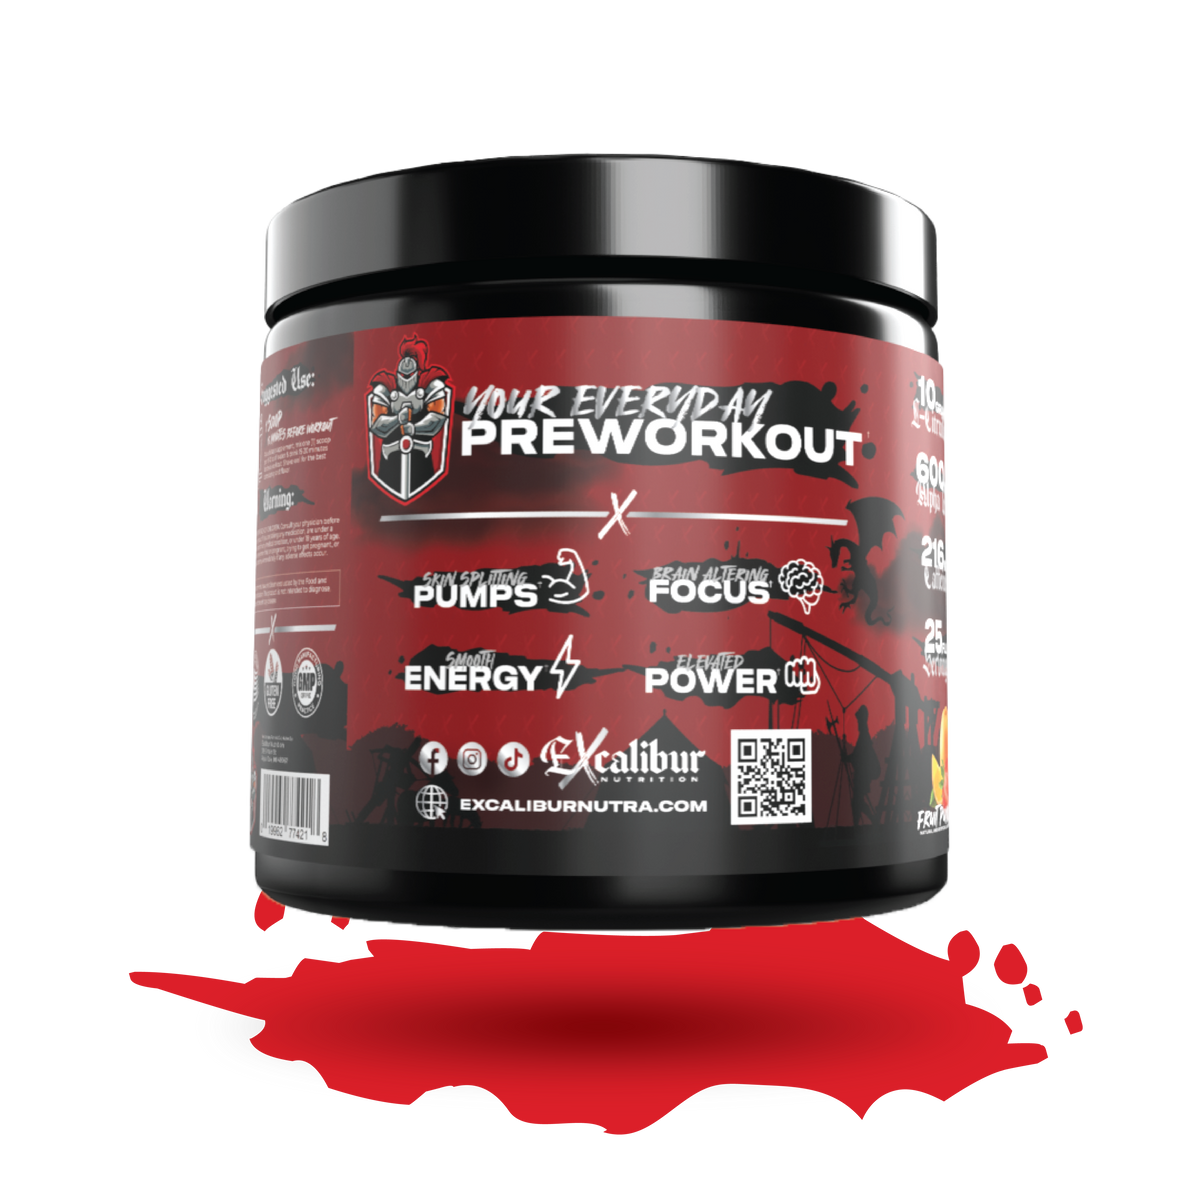 Preworkout, Fitness, Energy, Focus, Pumps, Everyday, Supplements, Health